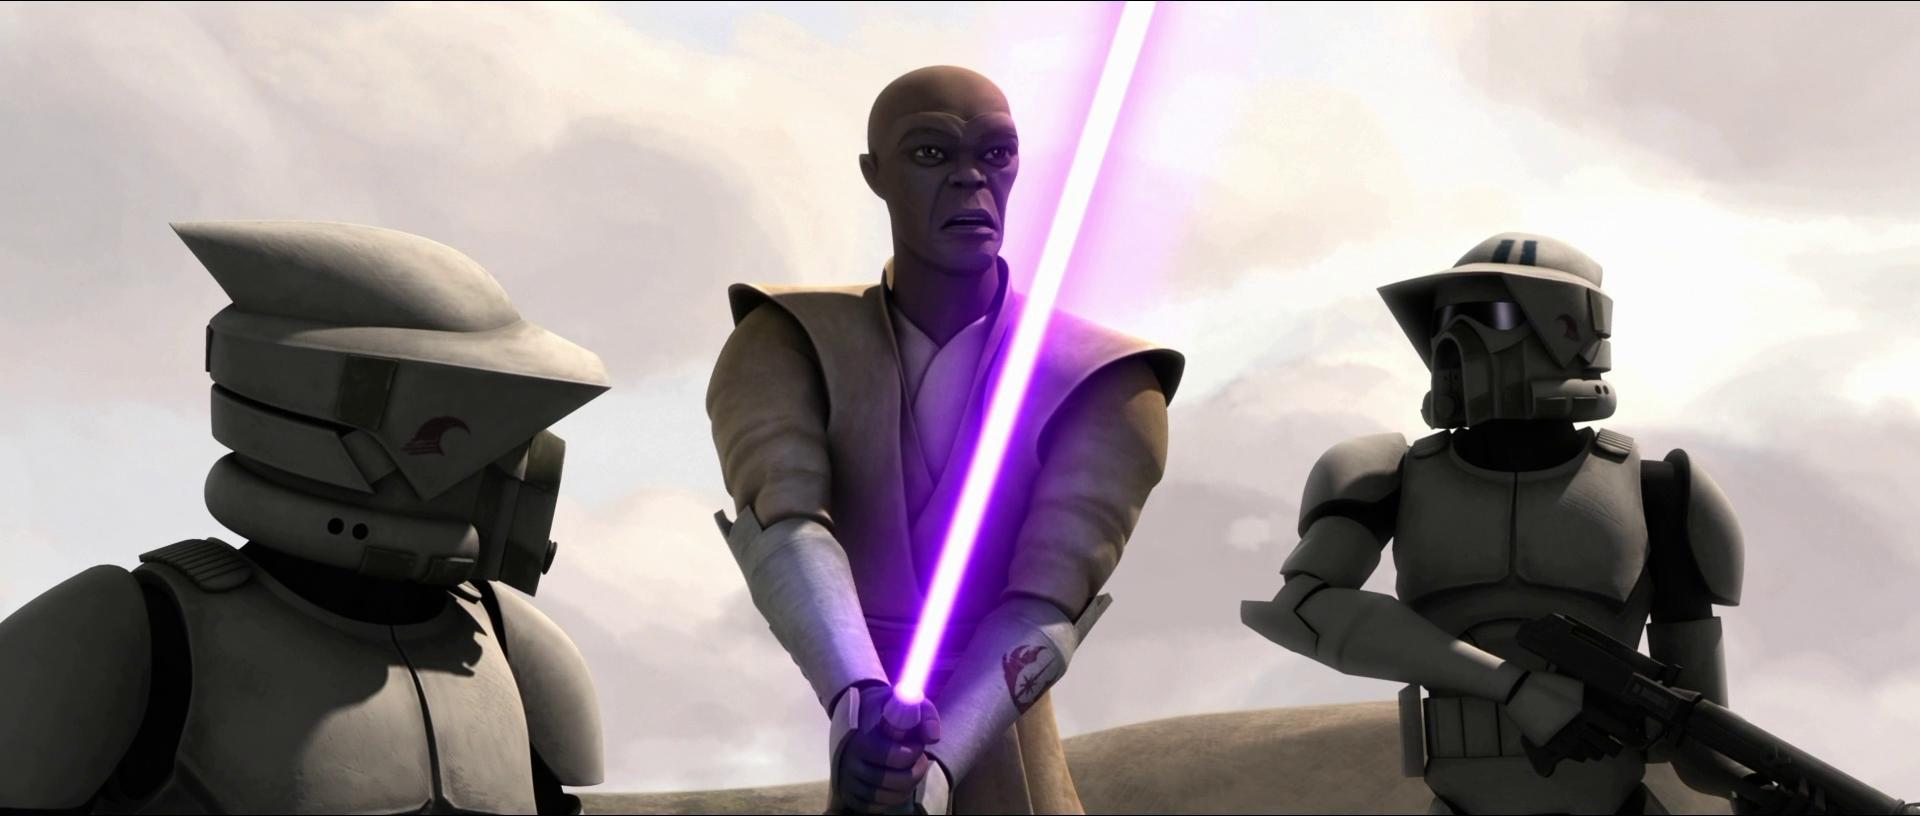 Star Wars: The Clone Wars Liberty on Ryloth (TV Episode 2009)